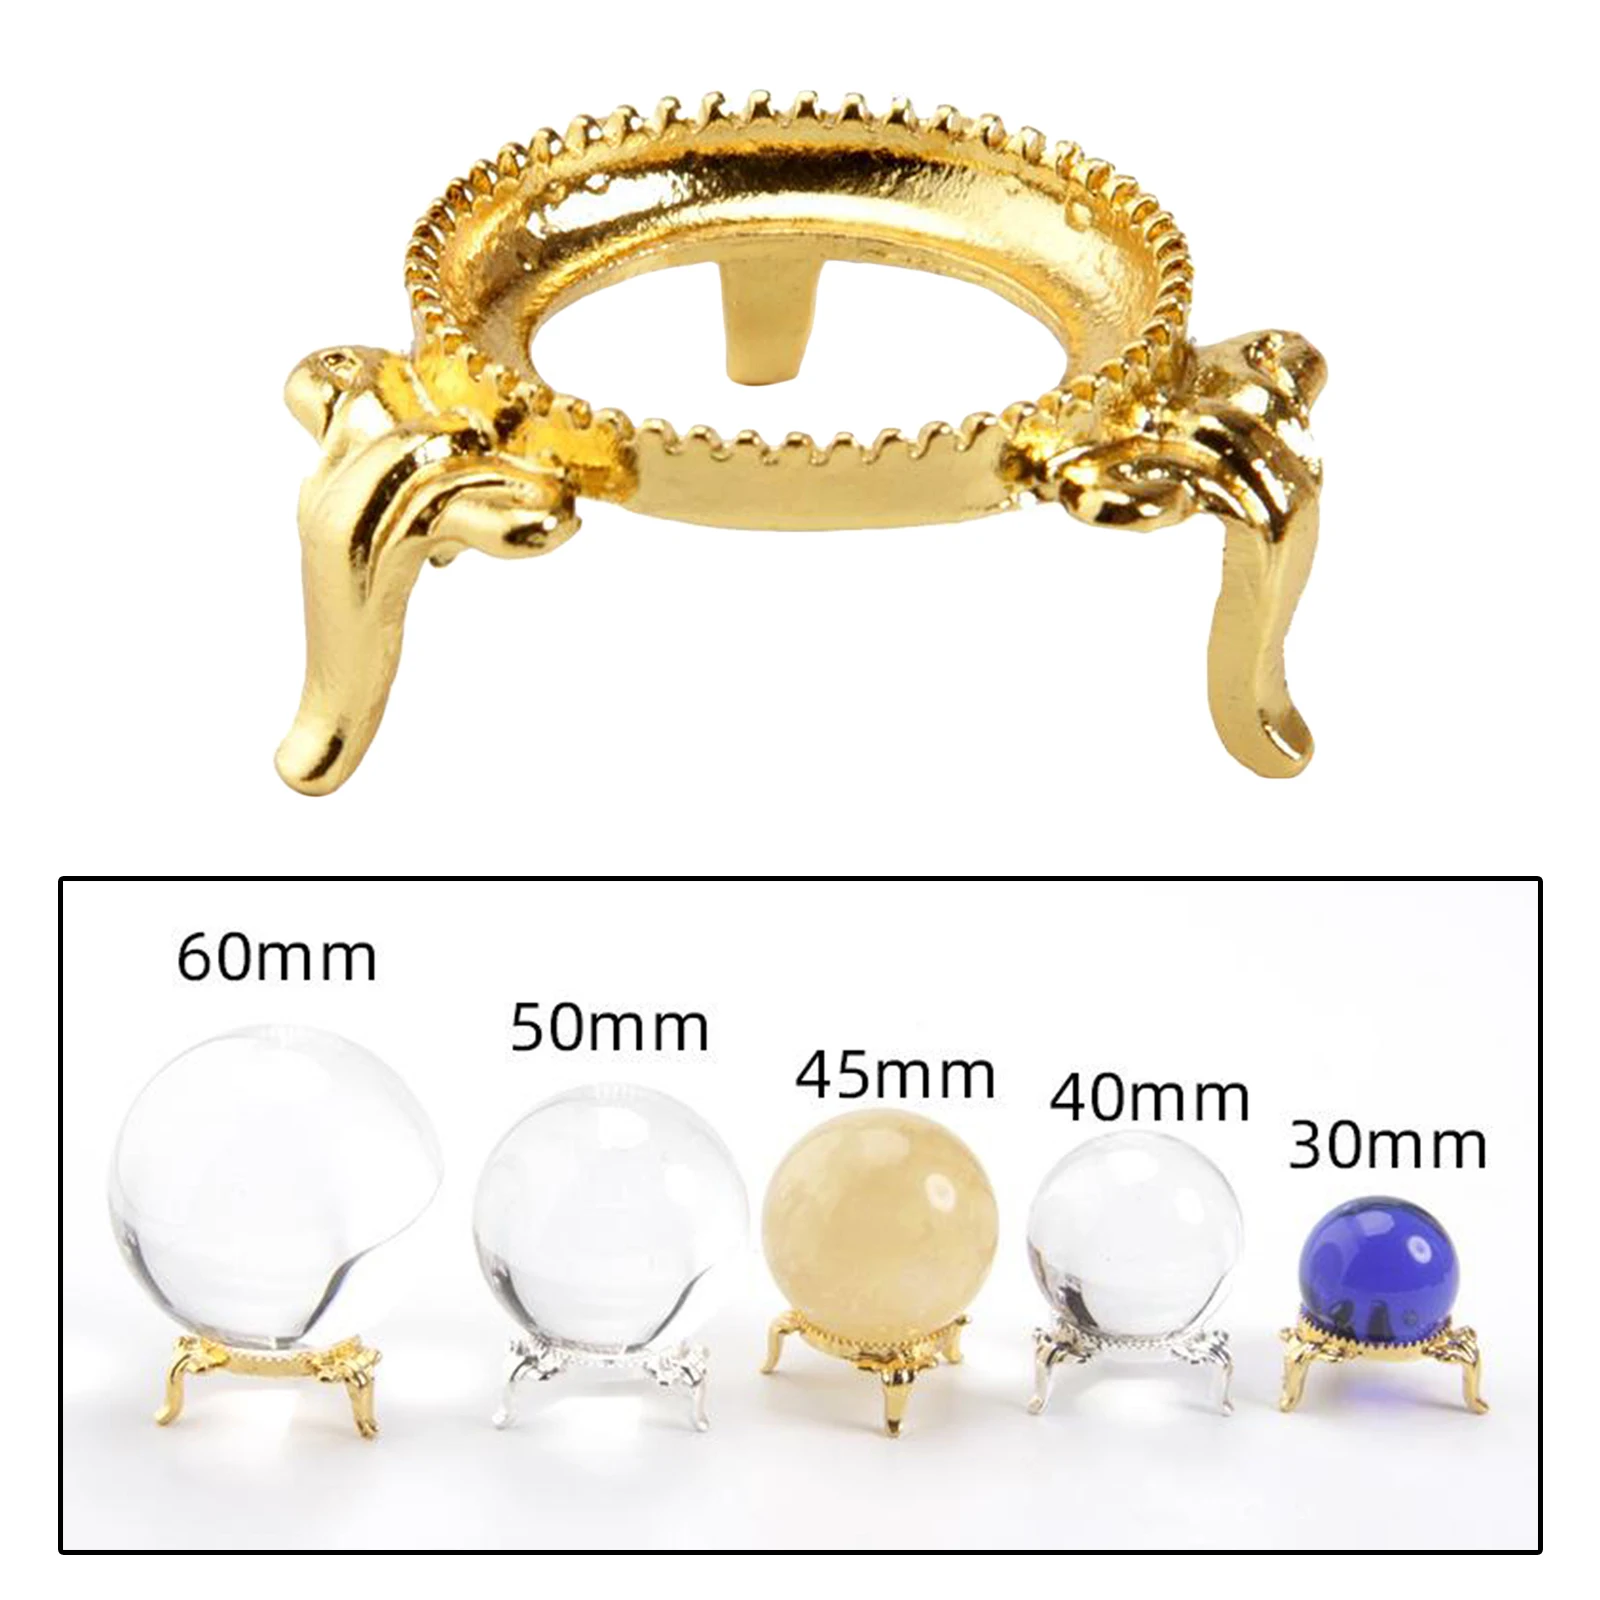 1pc Tripod Display Stand/Holder For Crystal Ball/Sphere/Eggs/Stones/Minerals 